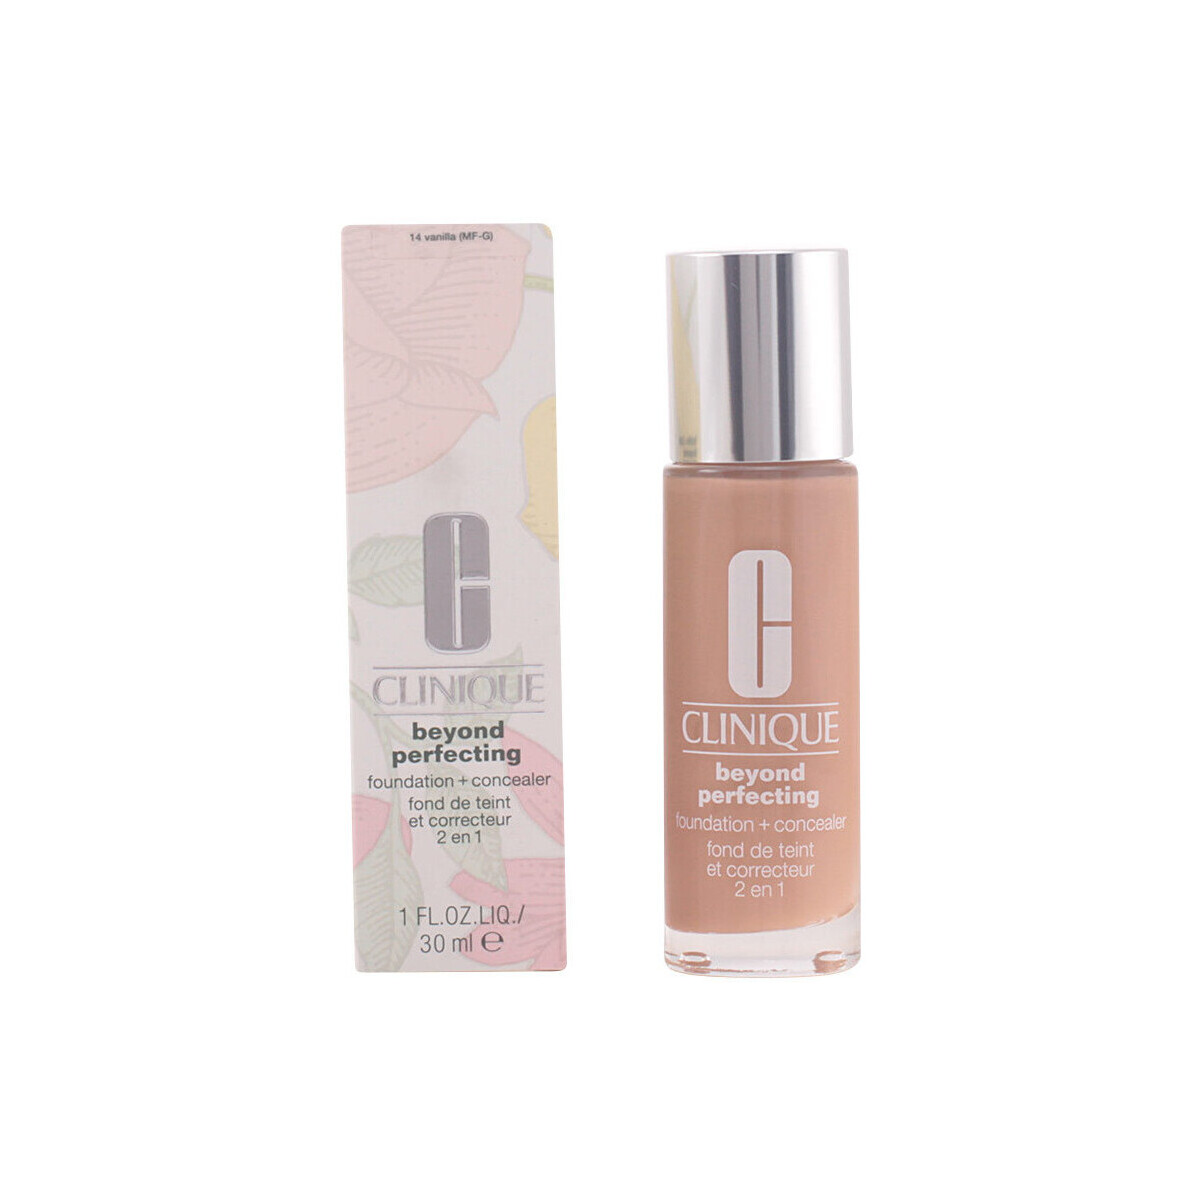 Beauty Damen Make-up & Foundation  Clinique Beyond Perfecting Foundation + Concealer 14-vanilla 